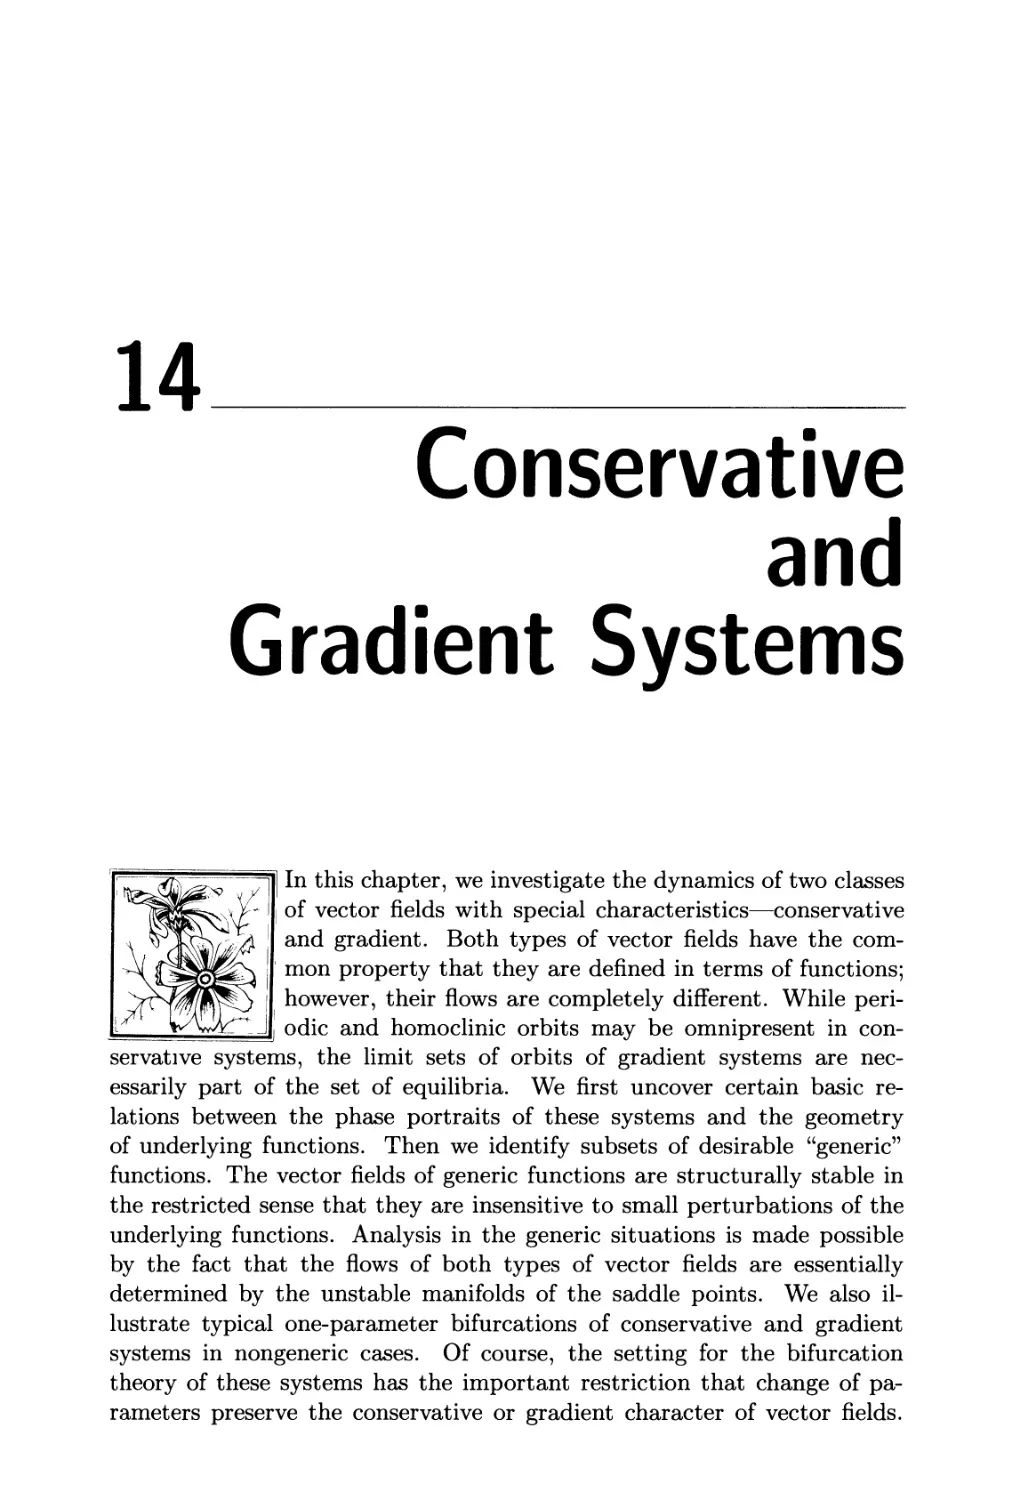 Chapter 14. Conservative and Gradient Systems